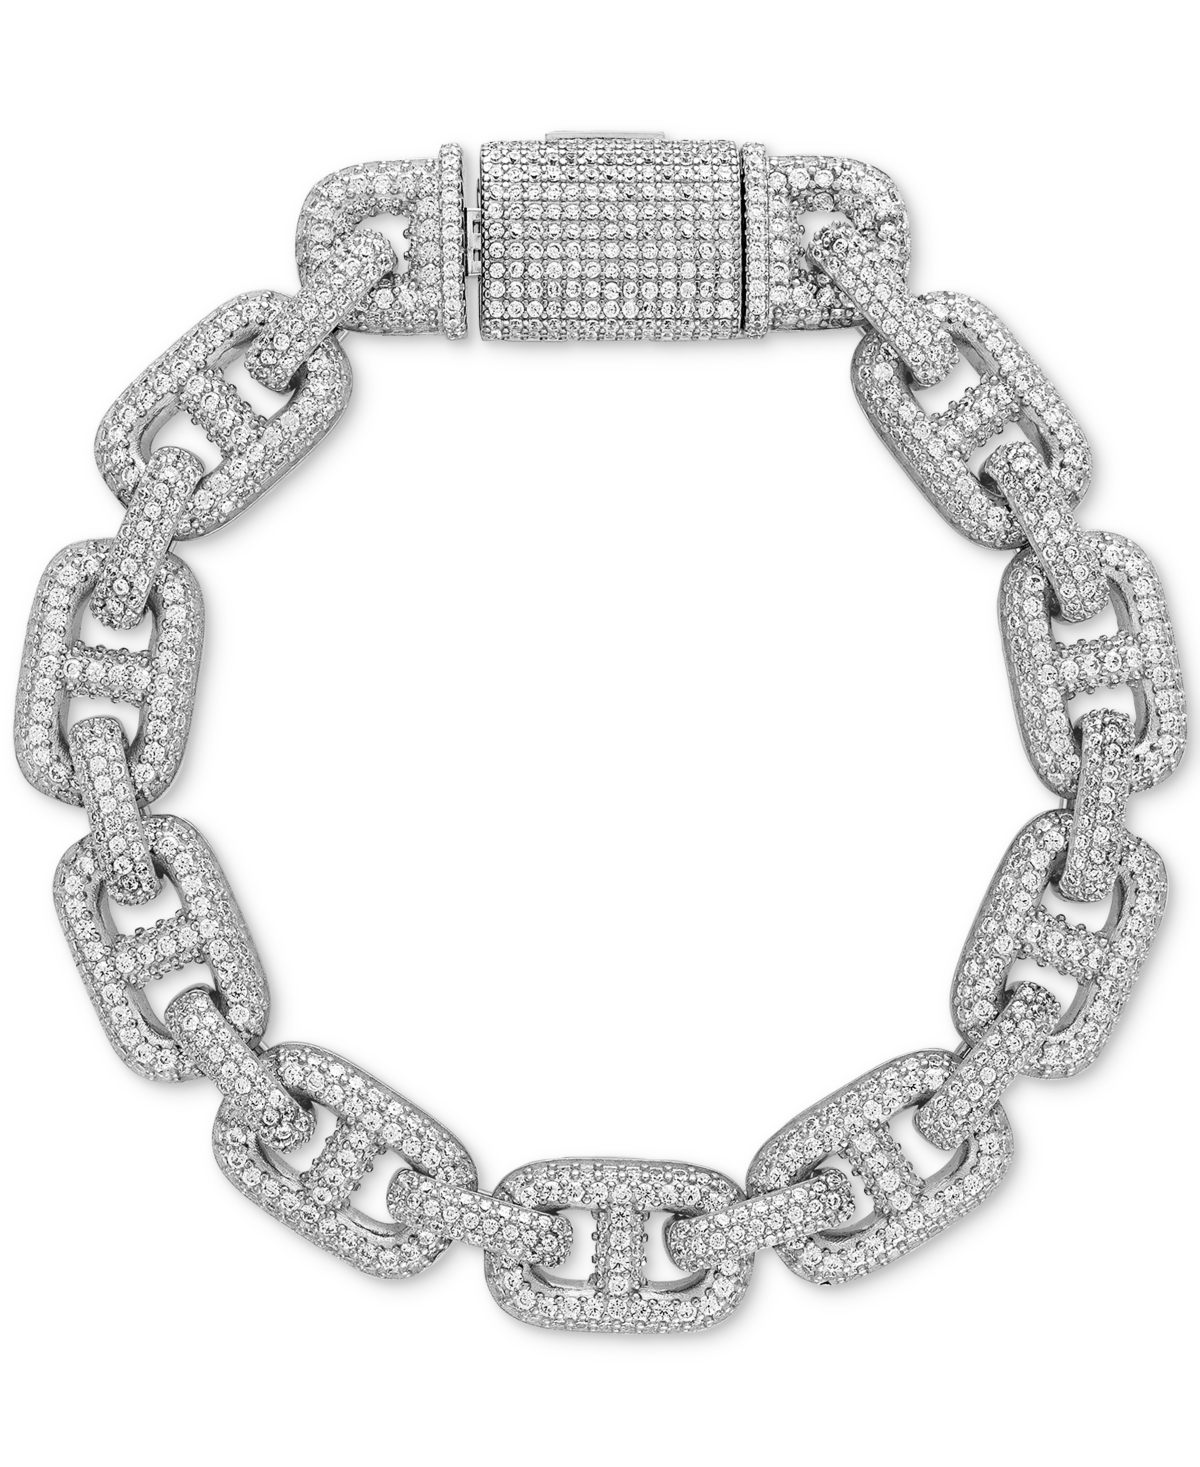 Cubic Zirconia Pave Puffed Mariner Link Chain Bracelet in Sterling Silver, Created for Macy's - White